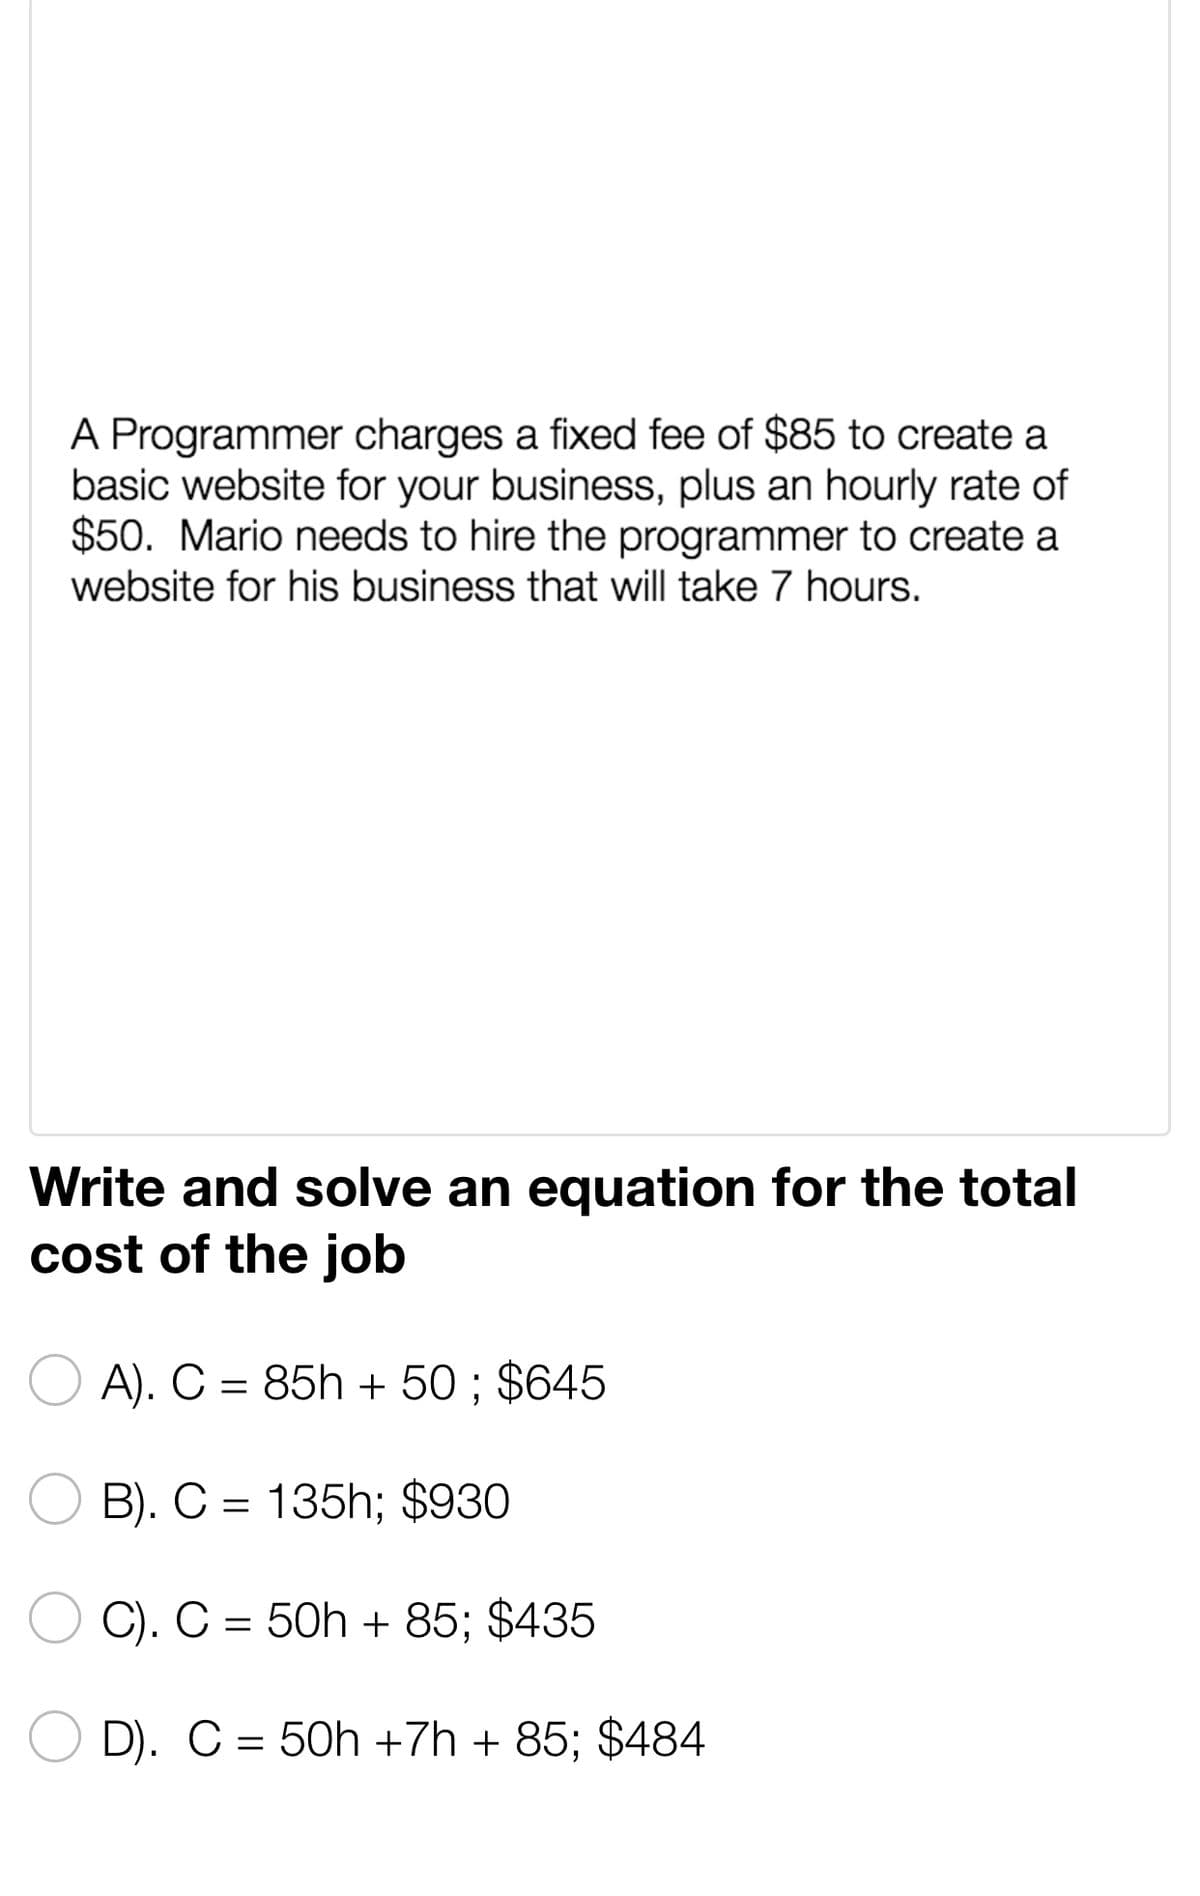 A Programmer charges a fixed fee of $85 to create a
basic website for your business, plus an hourly rate of
$50. Mario needs to hire the programmer to create a
website for his business that will take 7 hours.
Write and solve an equation for the total
cost of the job
A). C = 85h + 50; $645
B). C= 135h; $930
C). C = 50h +85; $435
D). C = 50h +7h + 85; $484